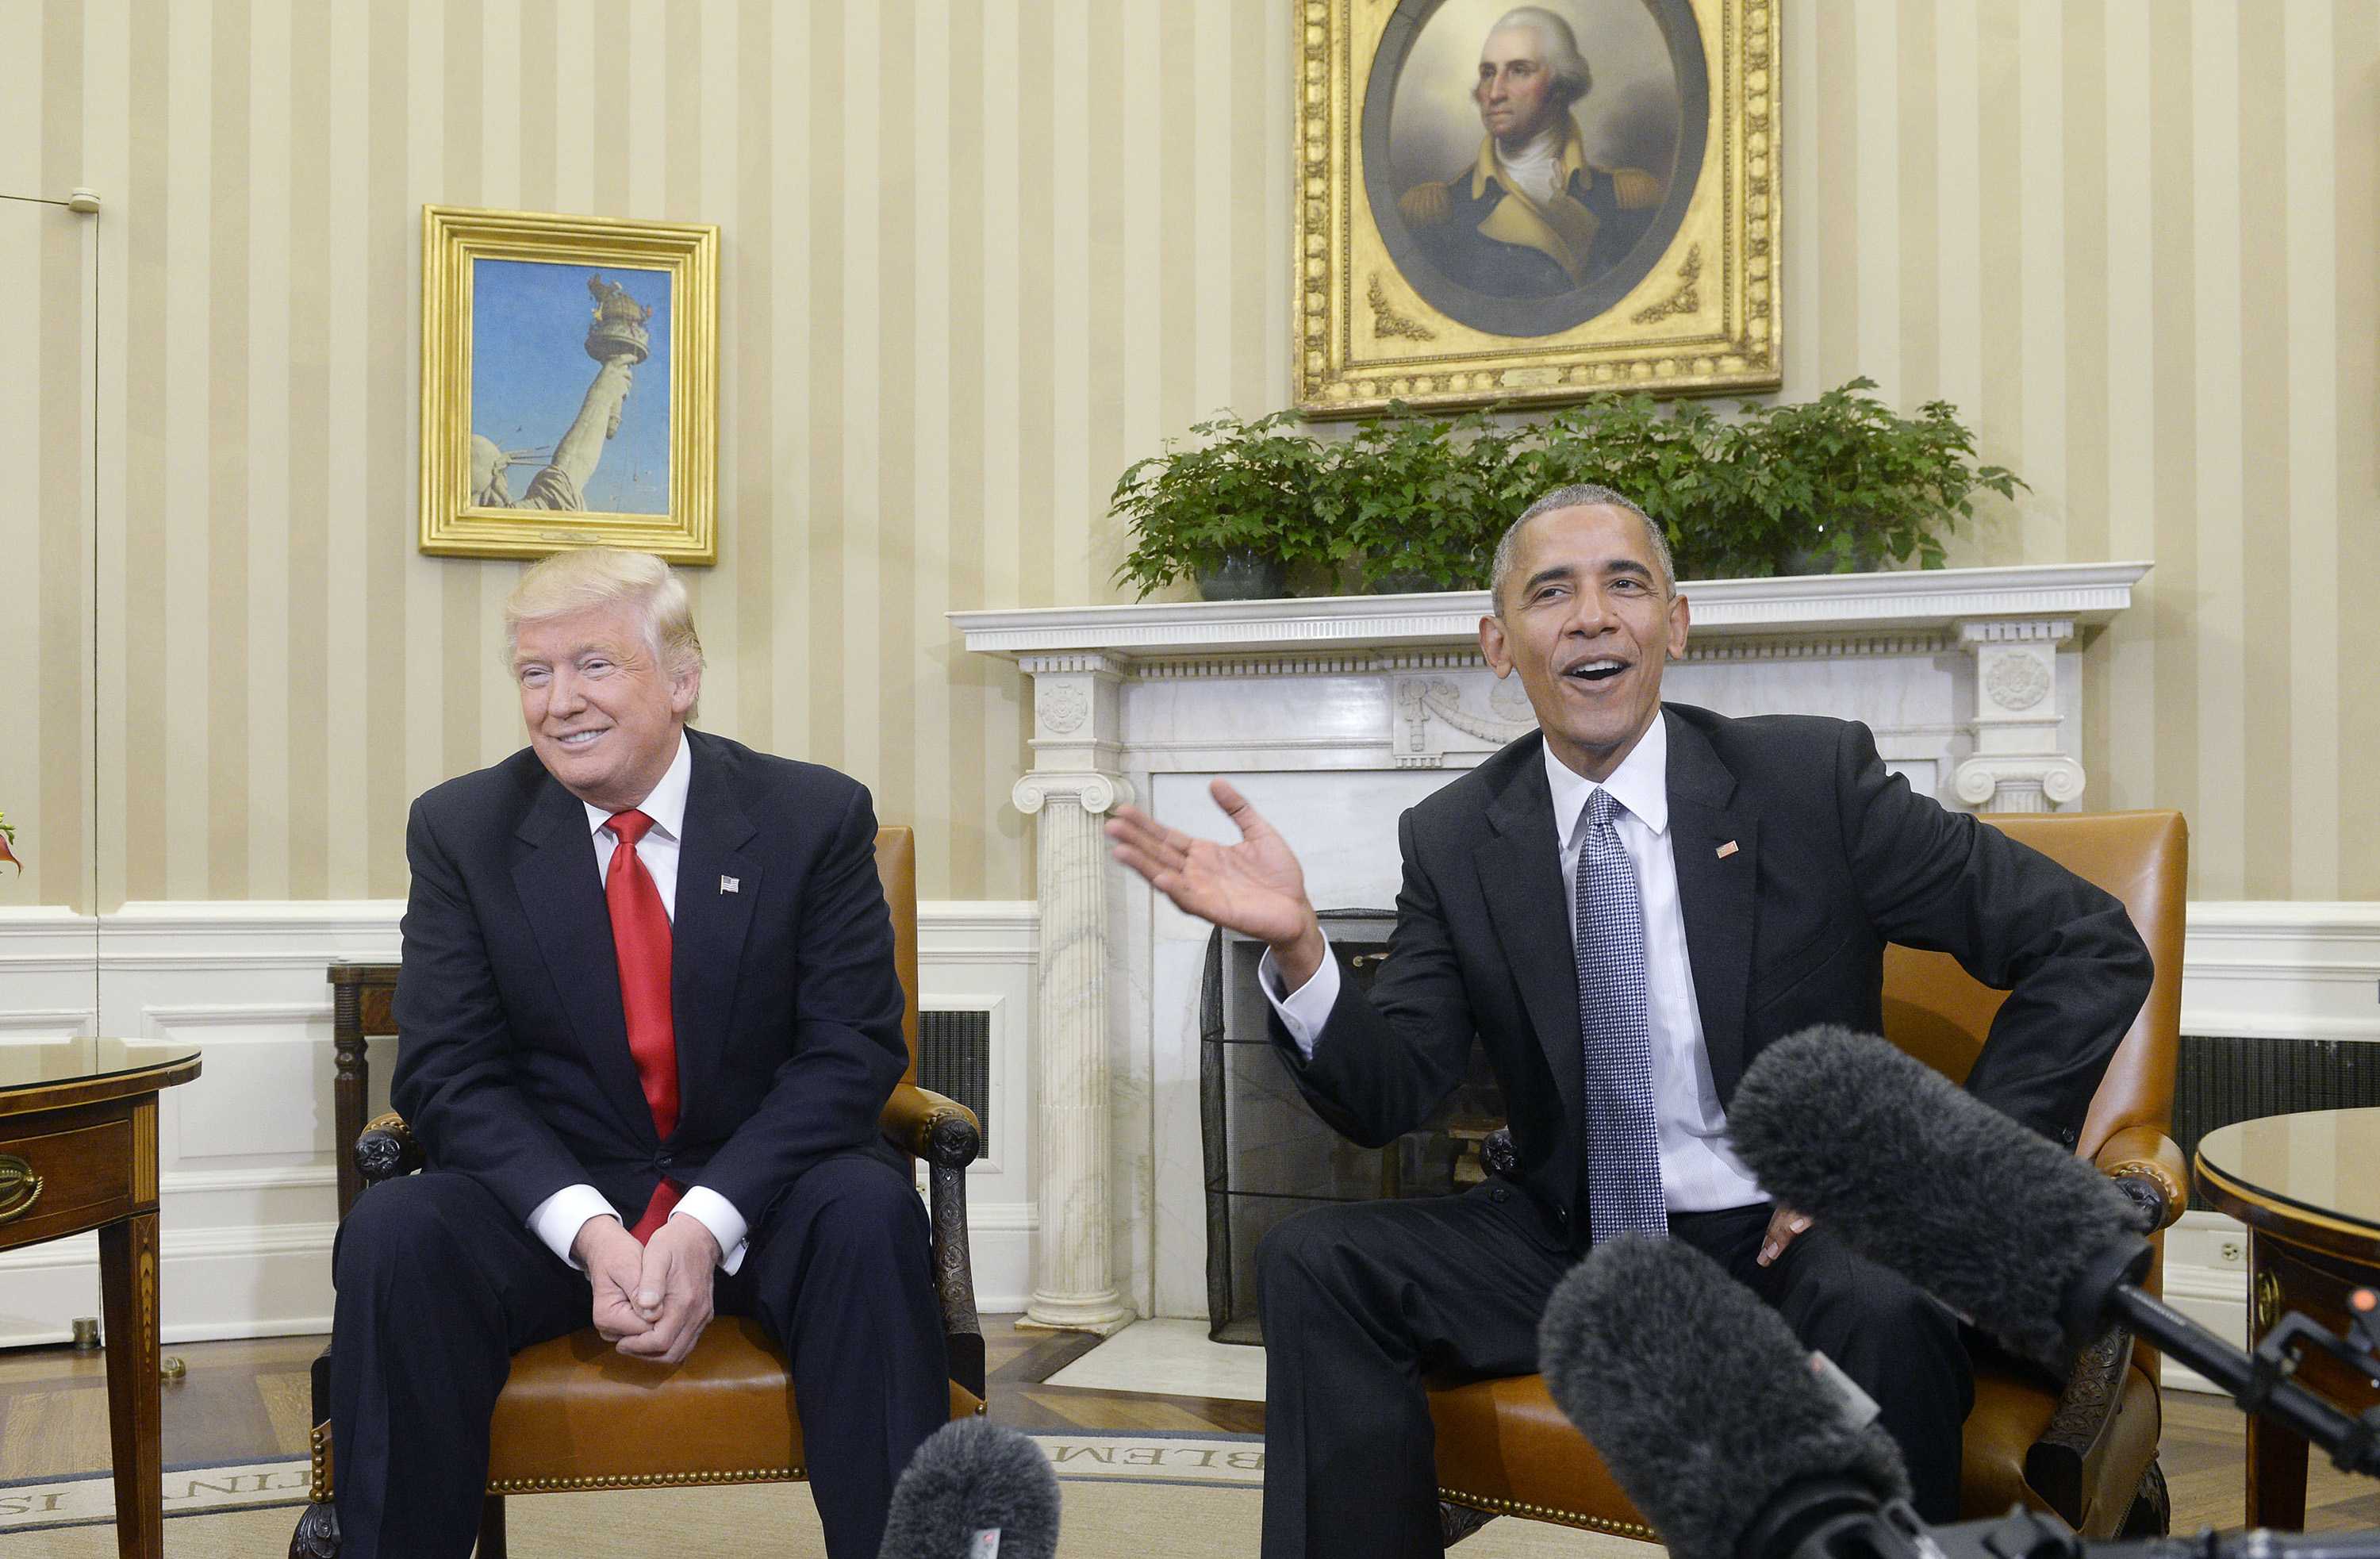 U.S. President Barack Obama meets with President-elect Donald Trump on Thursday, Nov. 10, 2016 in the Oval Office of the White House in Washington, D.C. in their first public step toward a transition of power. (Olivier Douliery/Abaca Press/TNS)